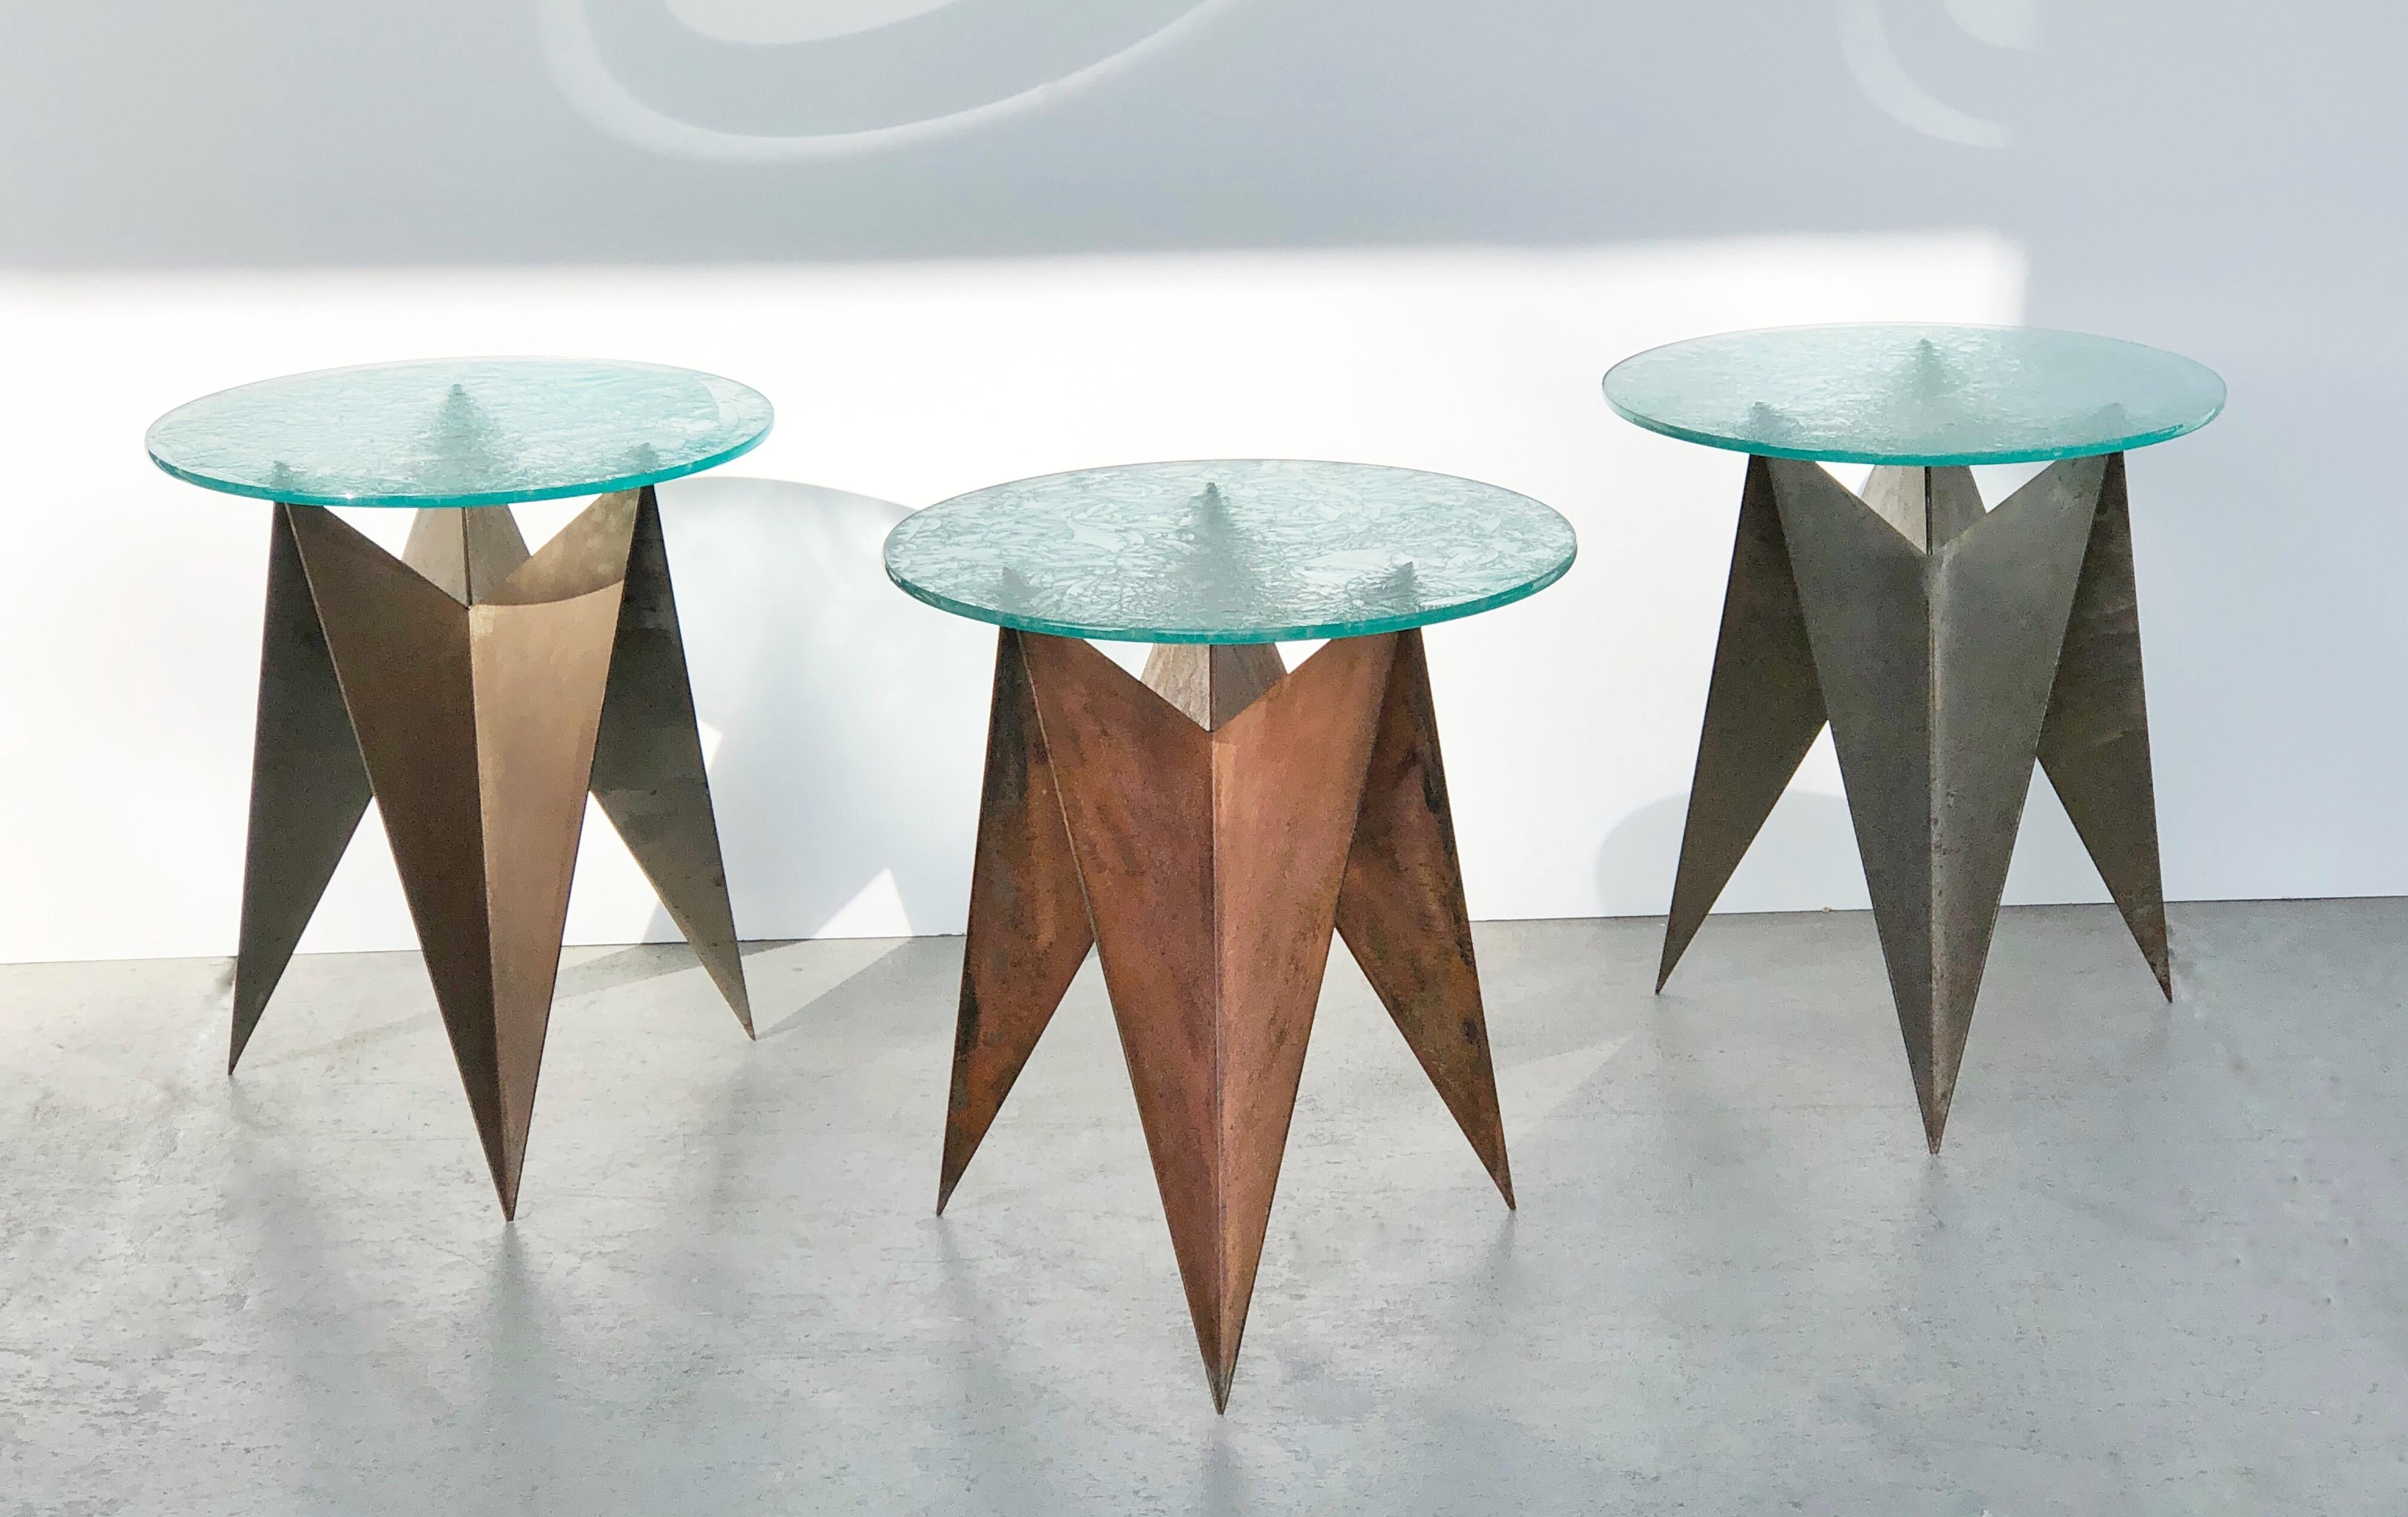 American Sculptural Trio of Geometric Metal Tables with Glass Tops, 1980s